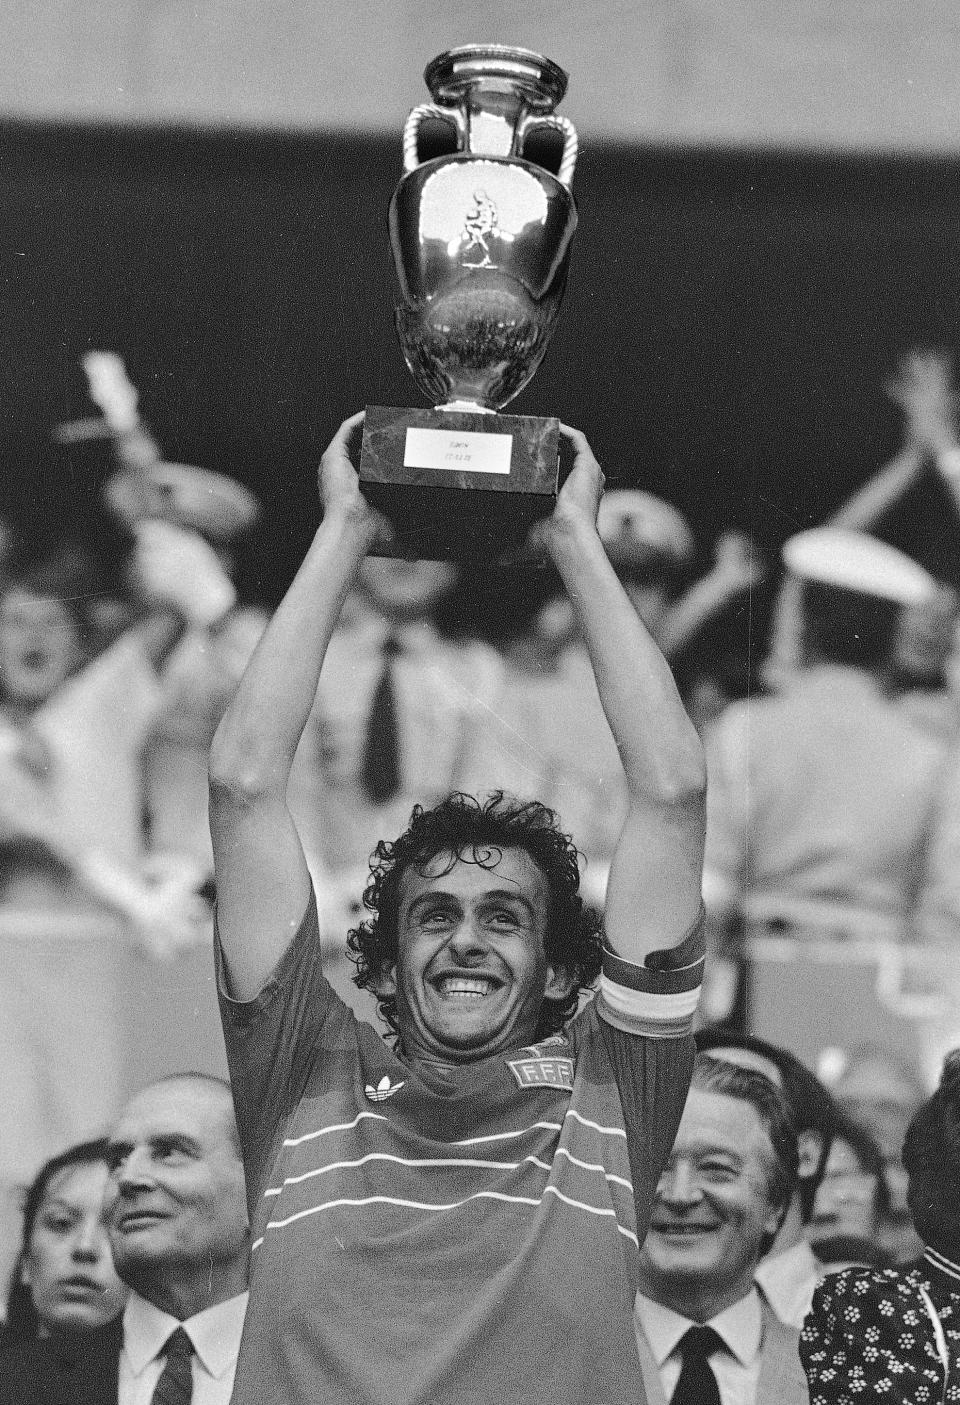 FILE - In this file b/w photo dated June 27, 1984 French team captain Michel Platini holds high the winner's cup after France beat Spain, 2-0, in the final match of the European Soccer Championship at the Parc des Princes stadium in Paris. Affectionately nicknamed “Le Roi” (The King), Michel Platini bestrode the soccer field with inimitable elegance as the world’s best player of the early 1980s, but his lofty reputation seems to have been tainted.(AP Photo, FILE)